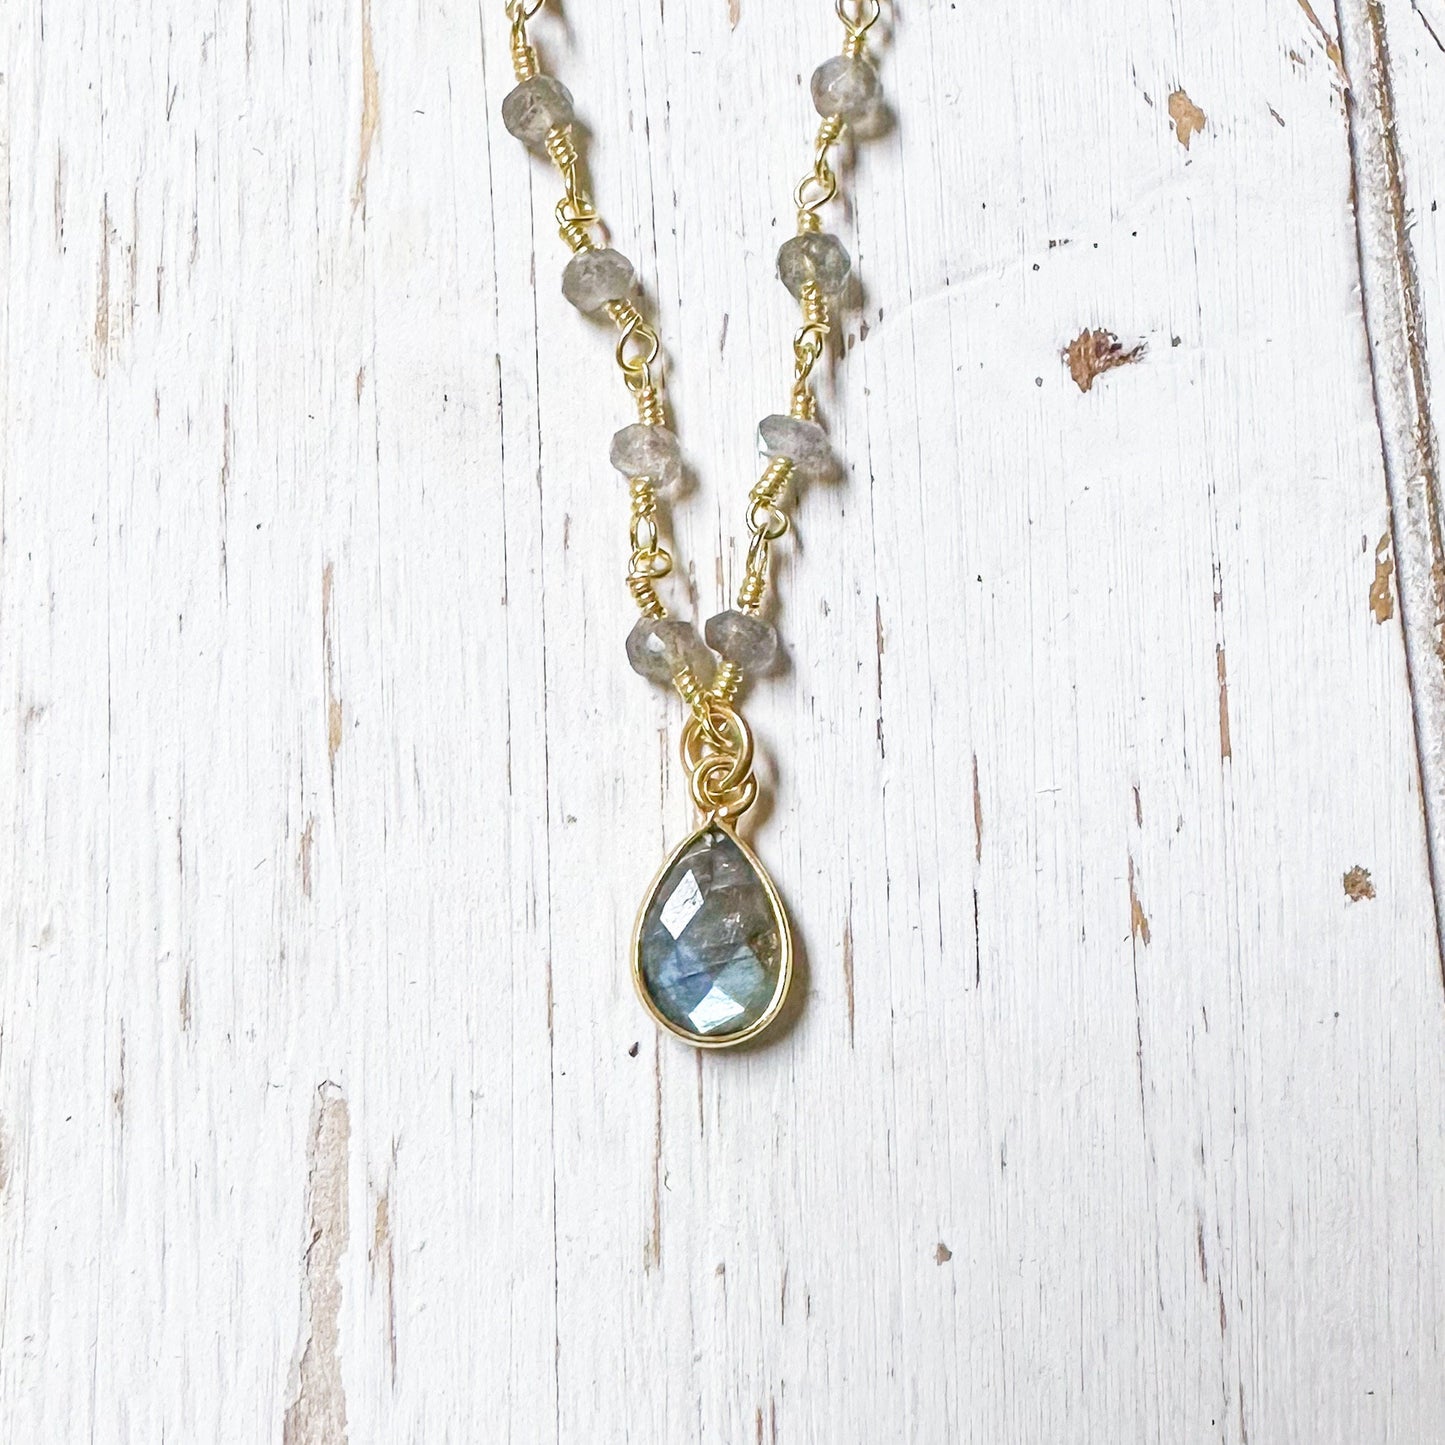 Labradorite and Gold necklace with Teardrop Pendant